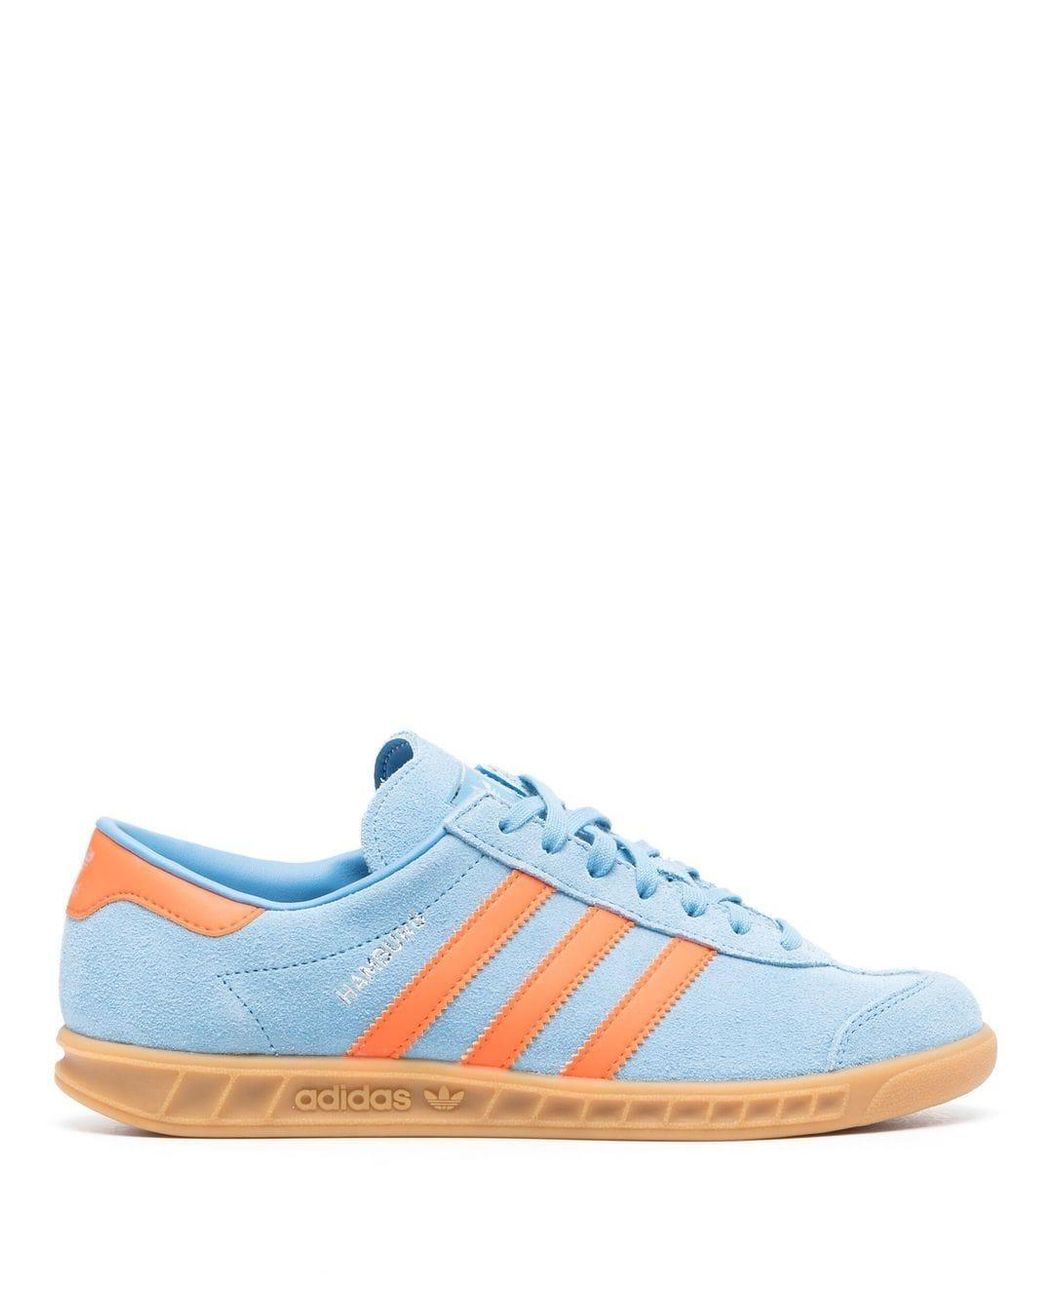 adidas Hamburg Lace-up Sneakers in Blue | Lyst